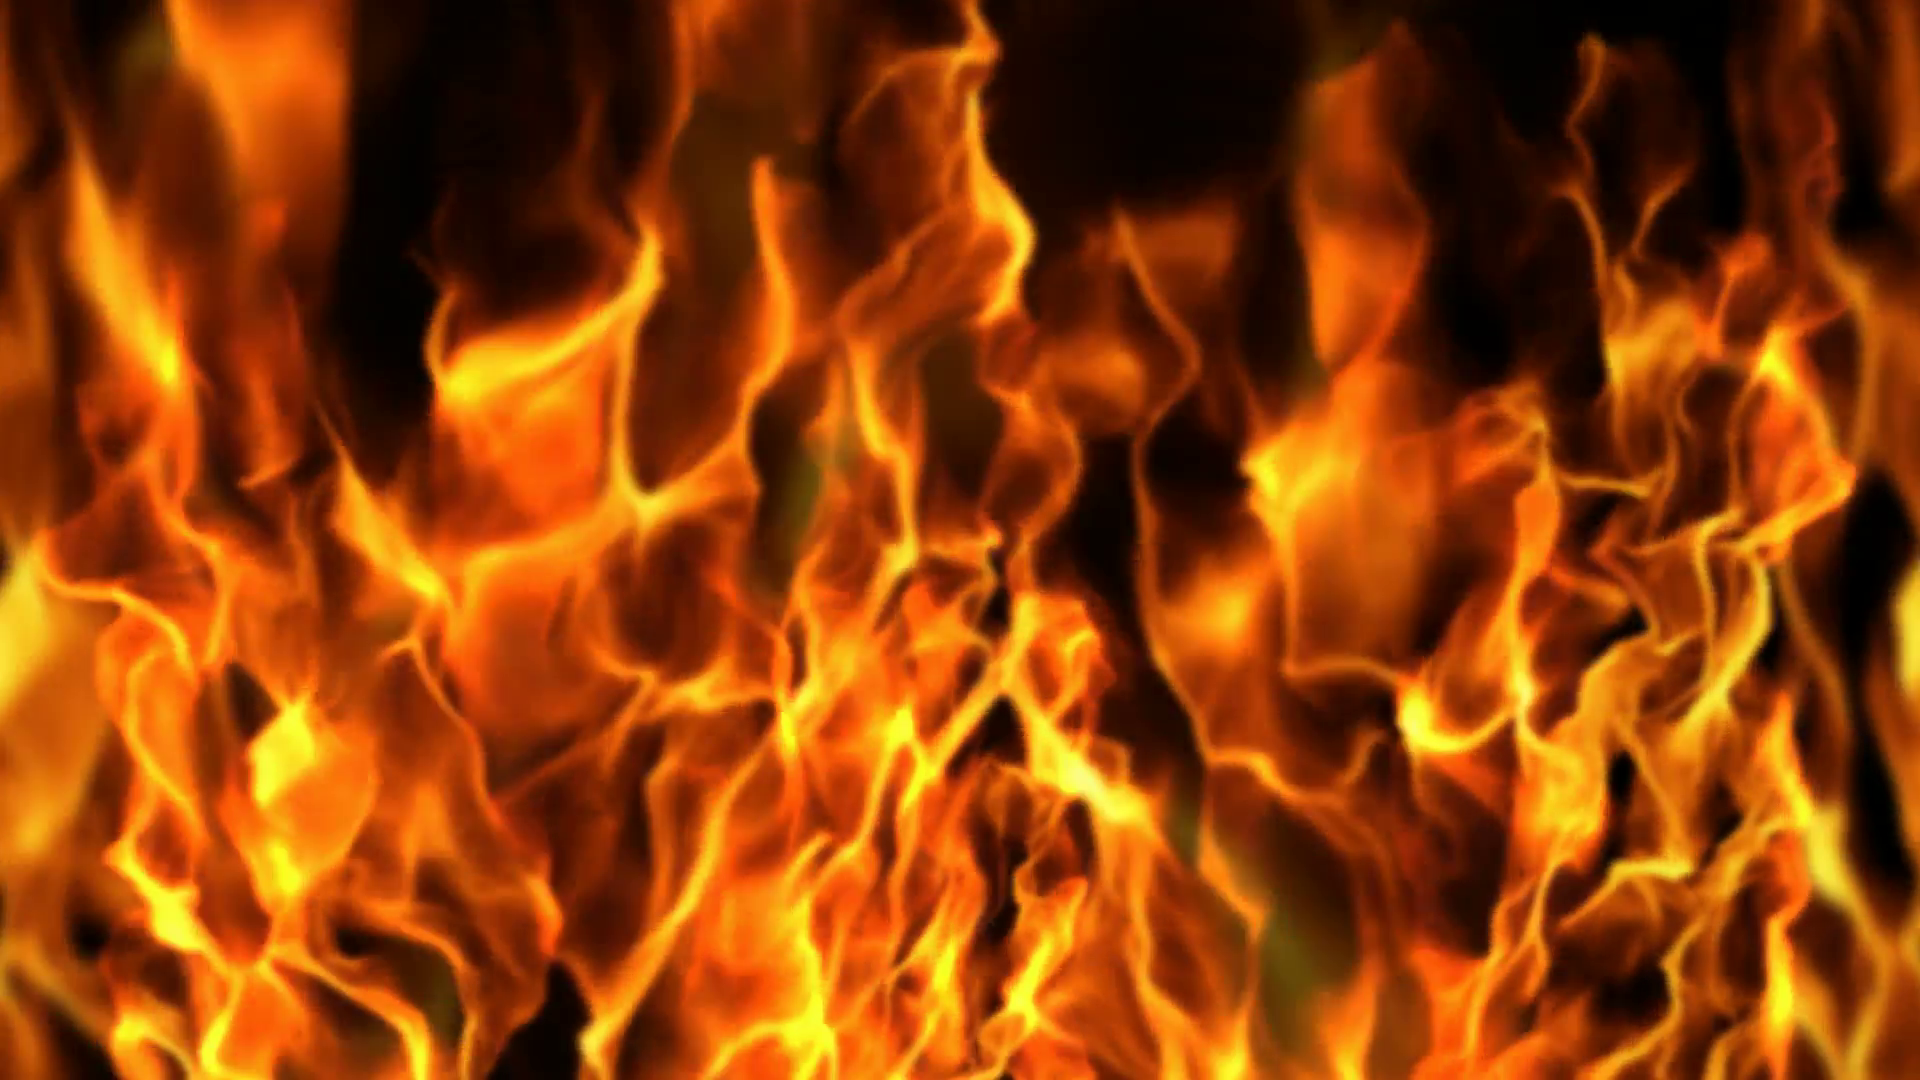 Flames and fire with black background Motion Background - Videoblocks